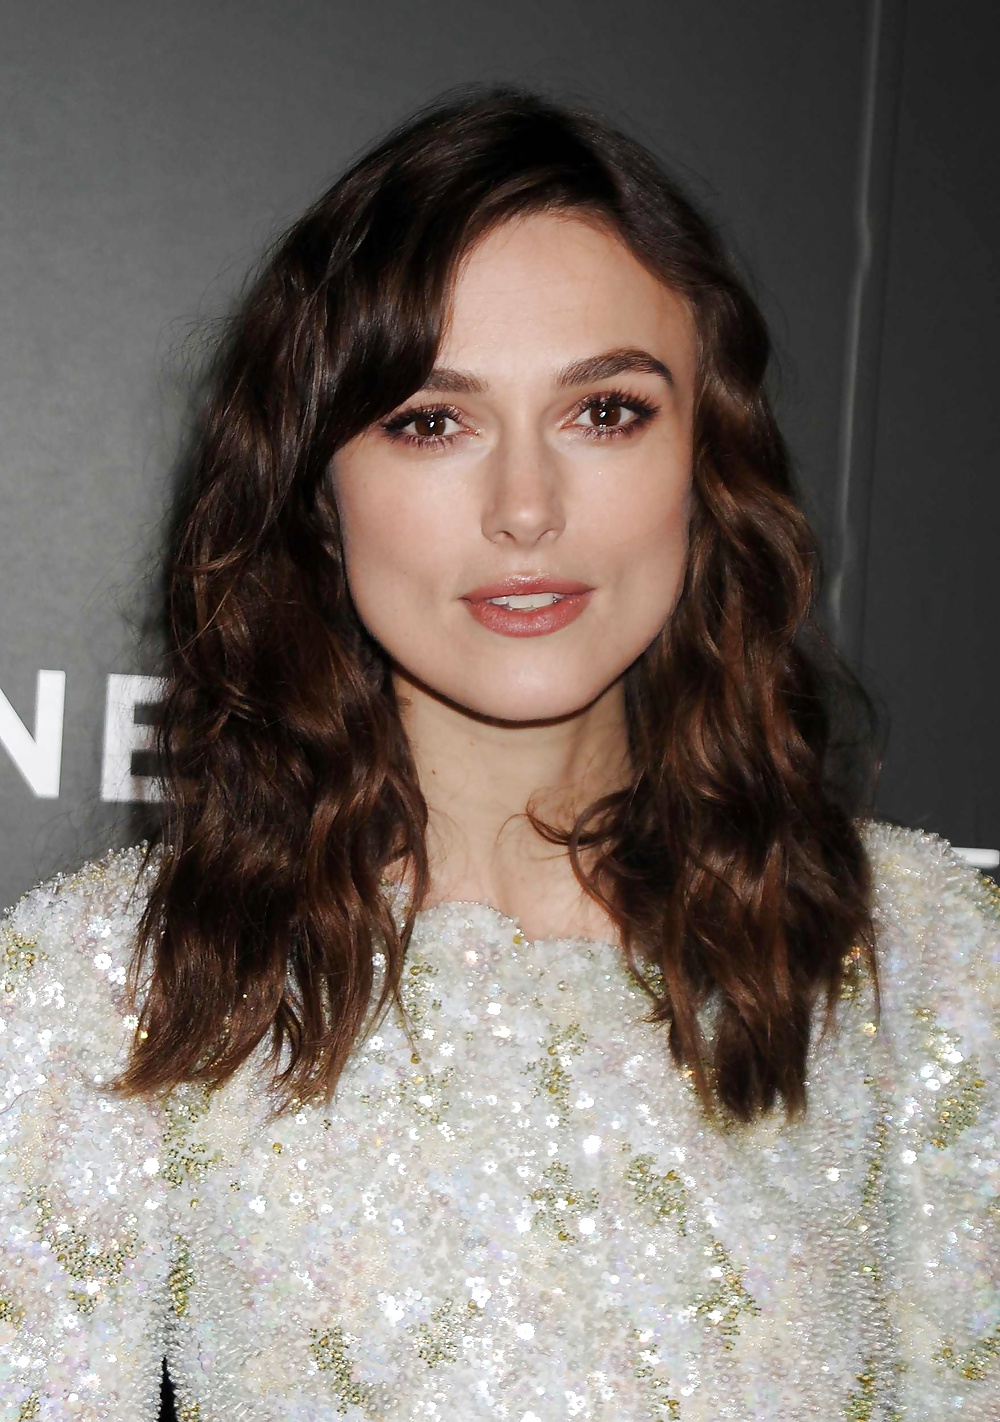 Keira Knightley The Royal Lady of England #35649572